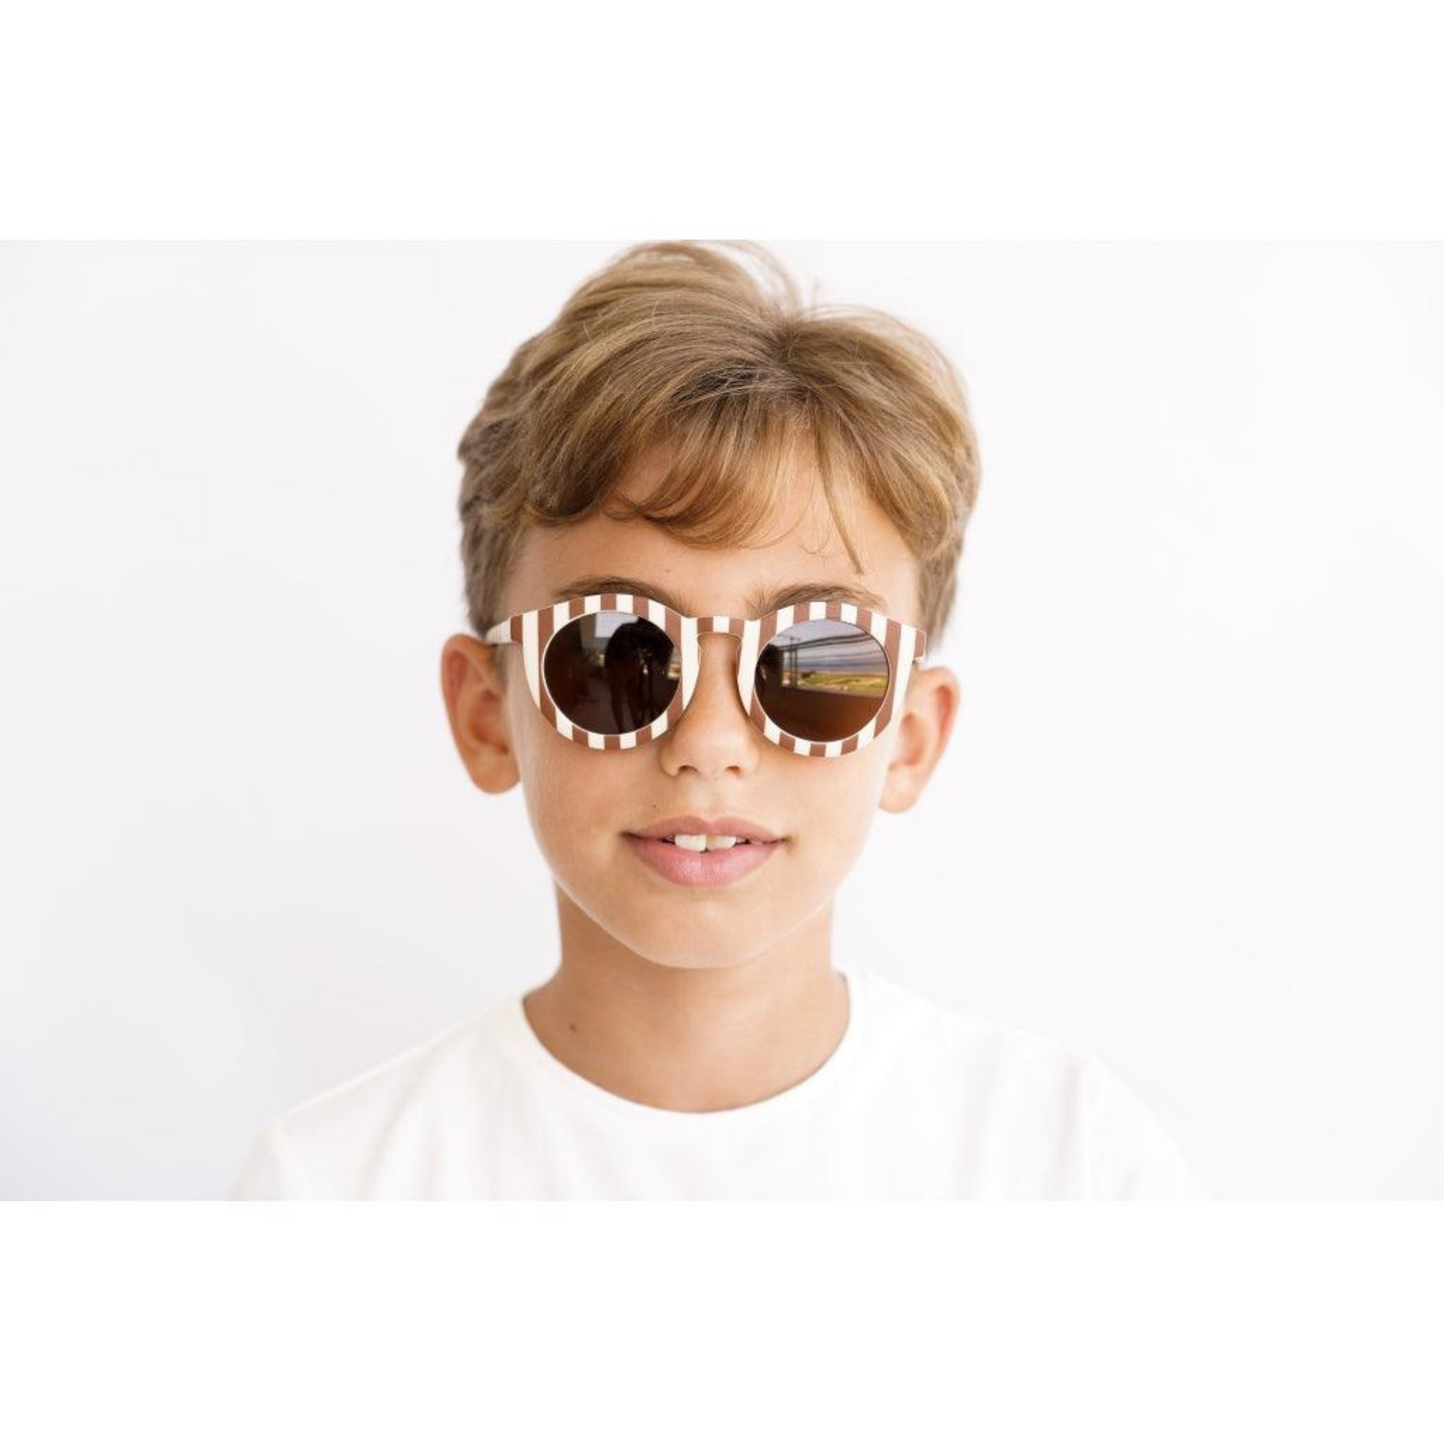 Classic Sustainable Children's Sunglasses in Atlas and Tierra Stripes